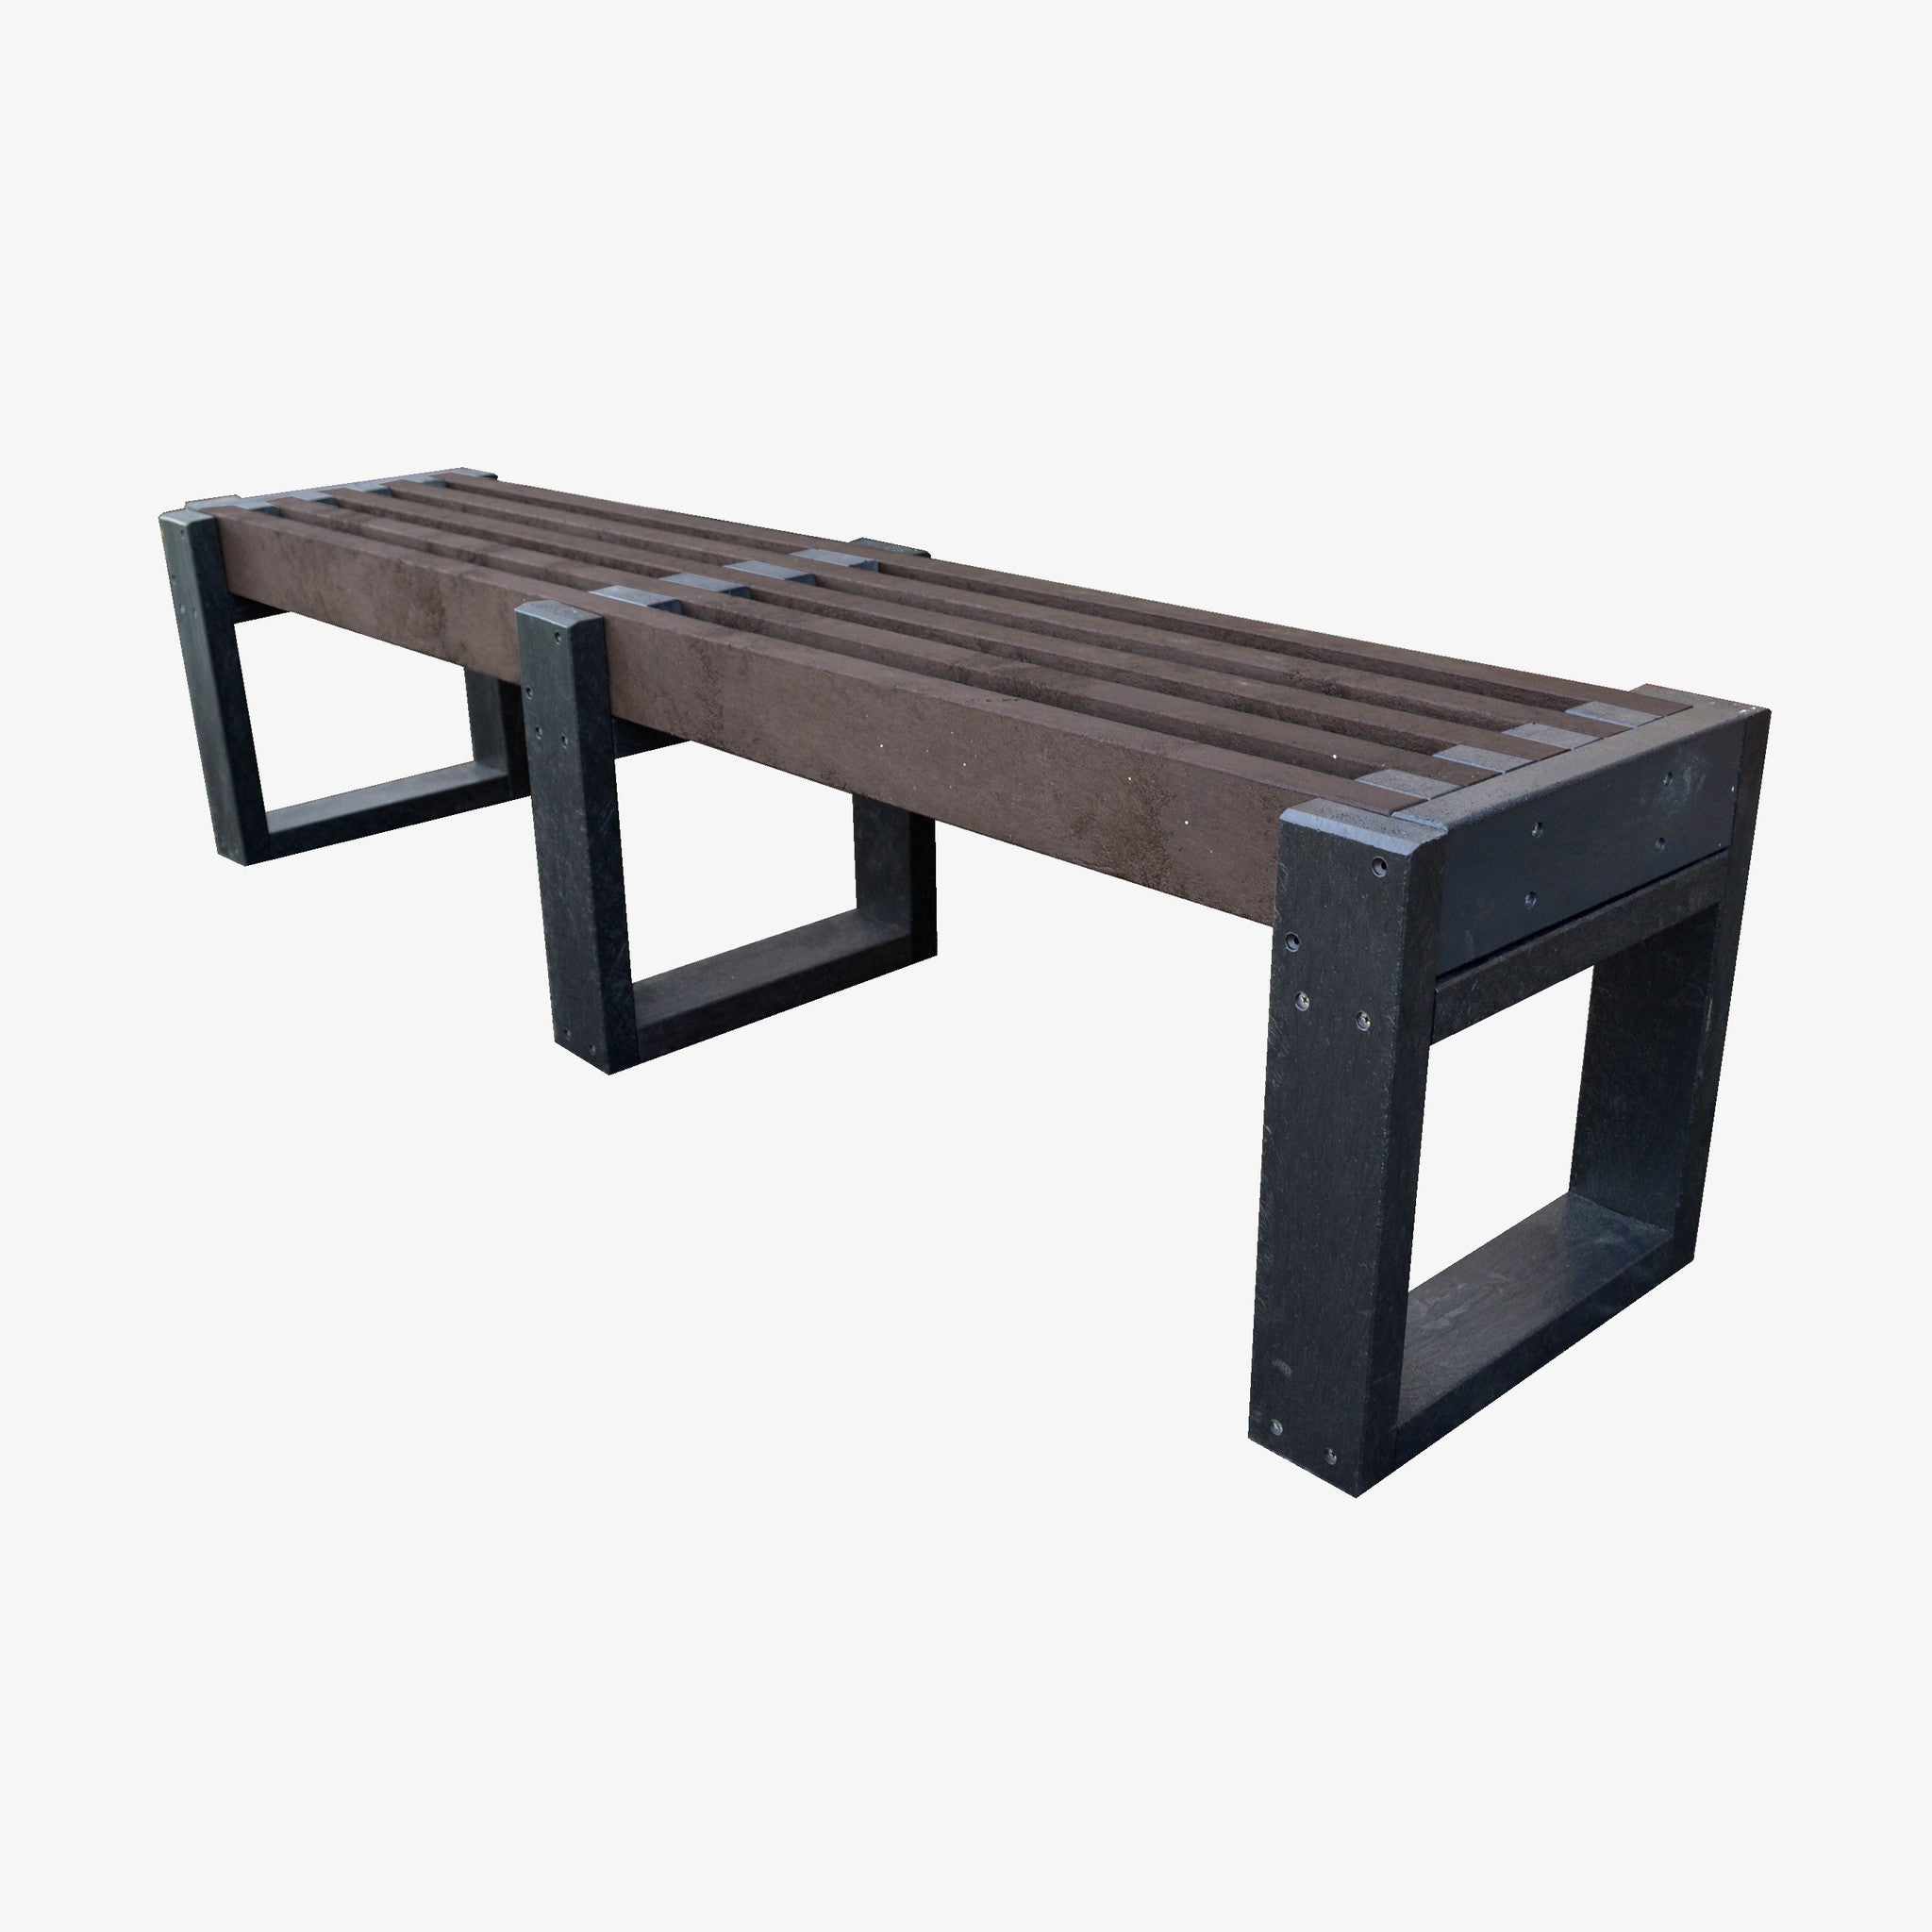 Manticore Lumber black & brown recycled plastic bench